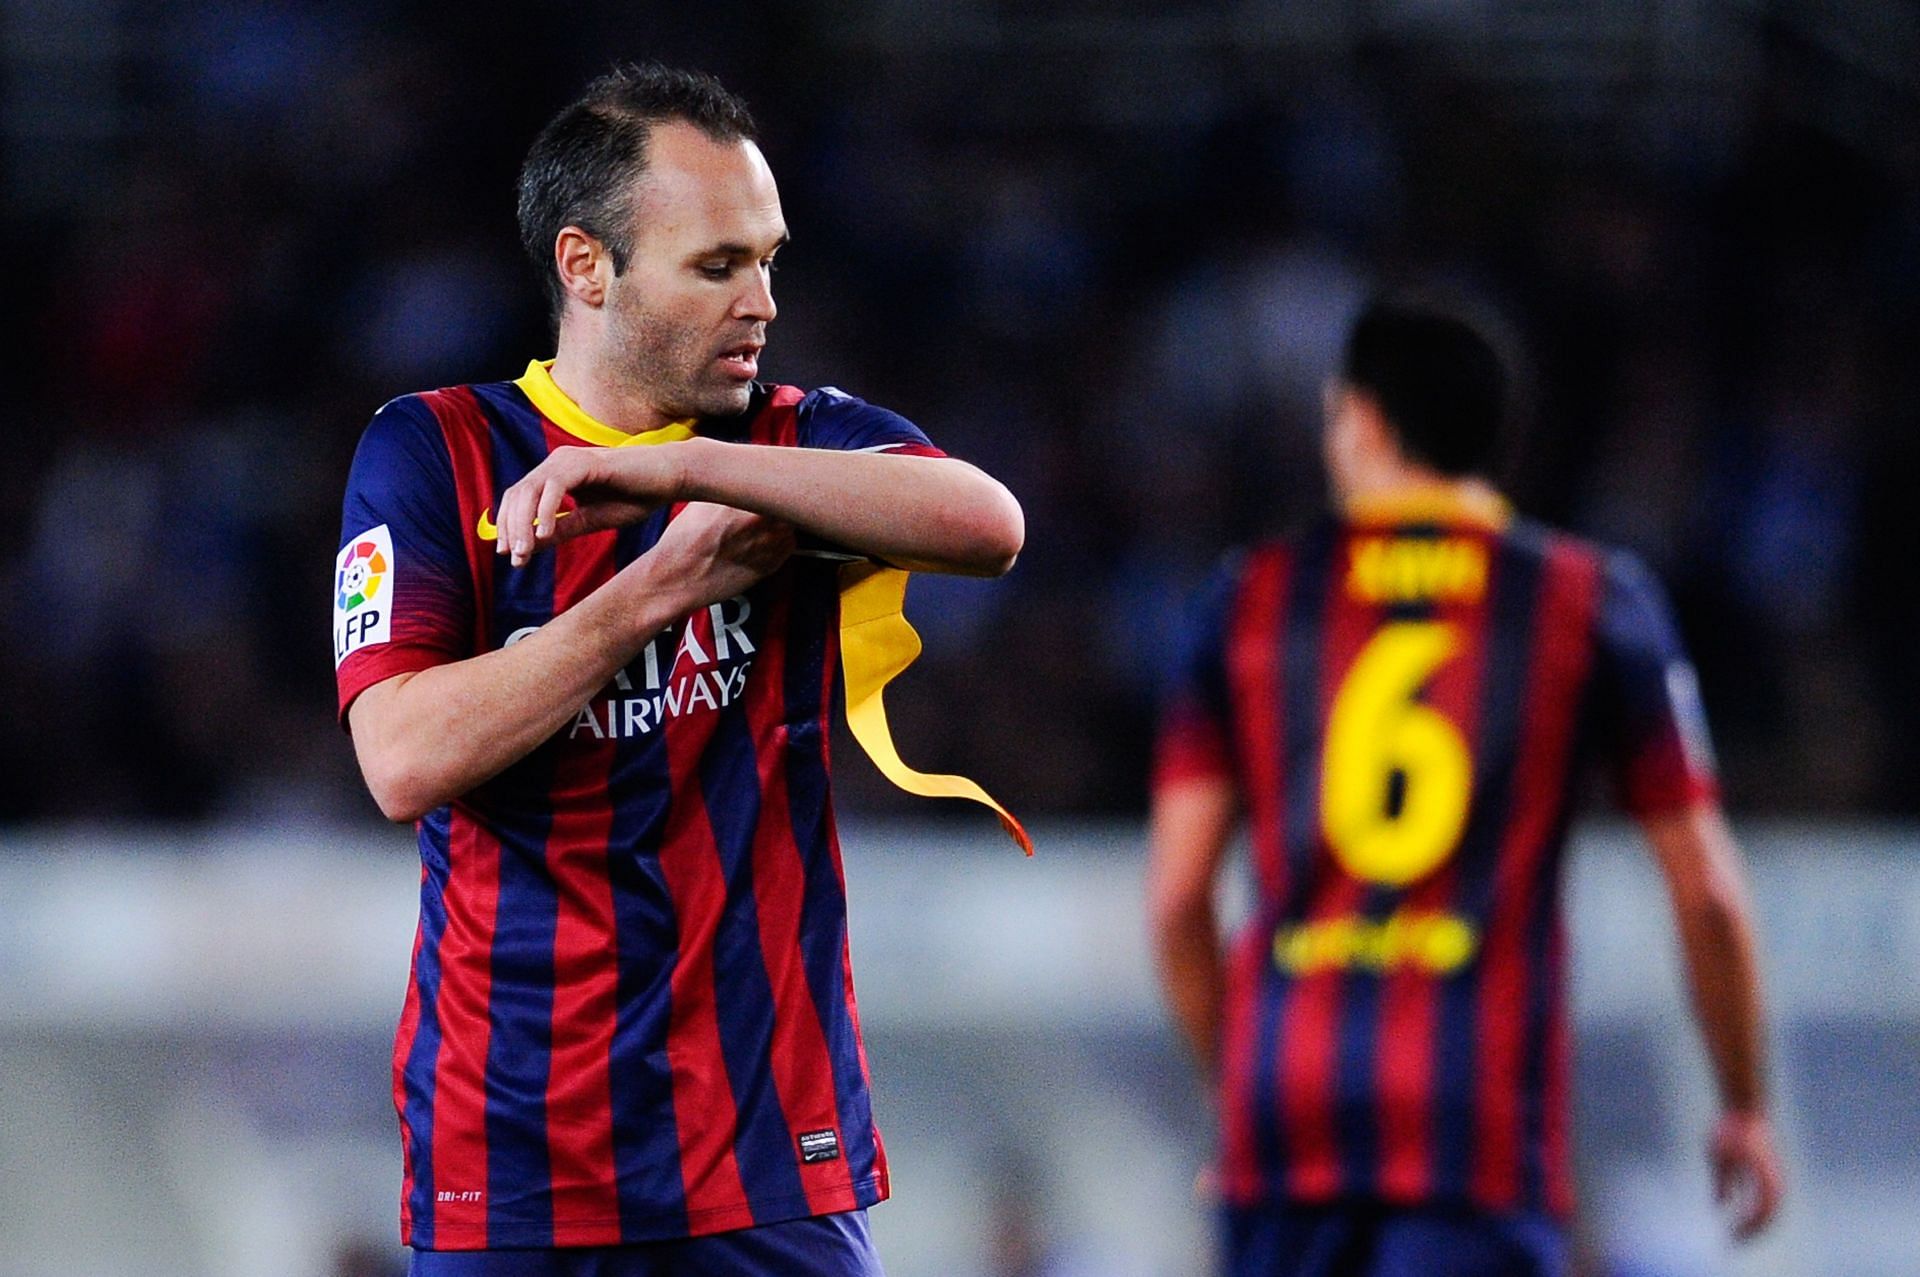 Barcelona have been home to some of the greatest midfielders of all time, including Iniesta (left) and Xavi (#6).